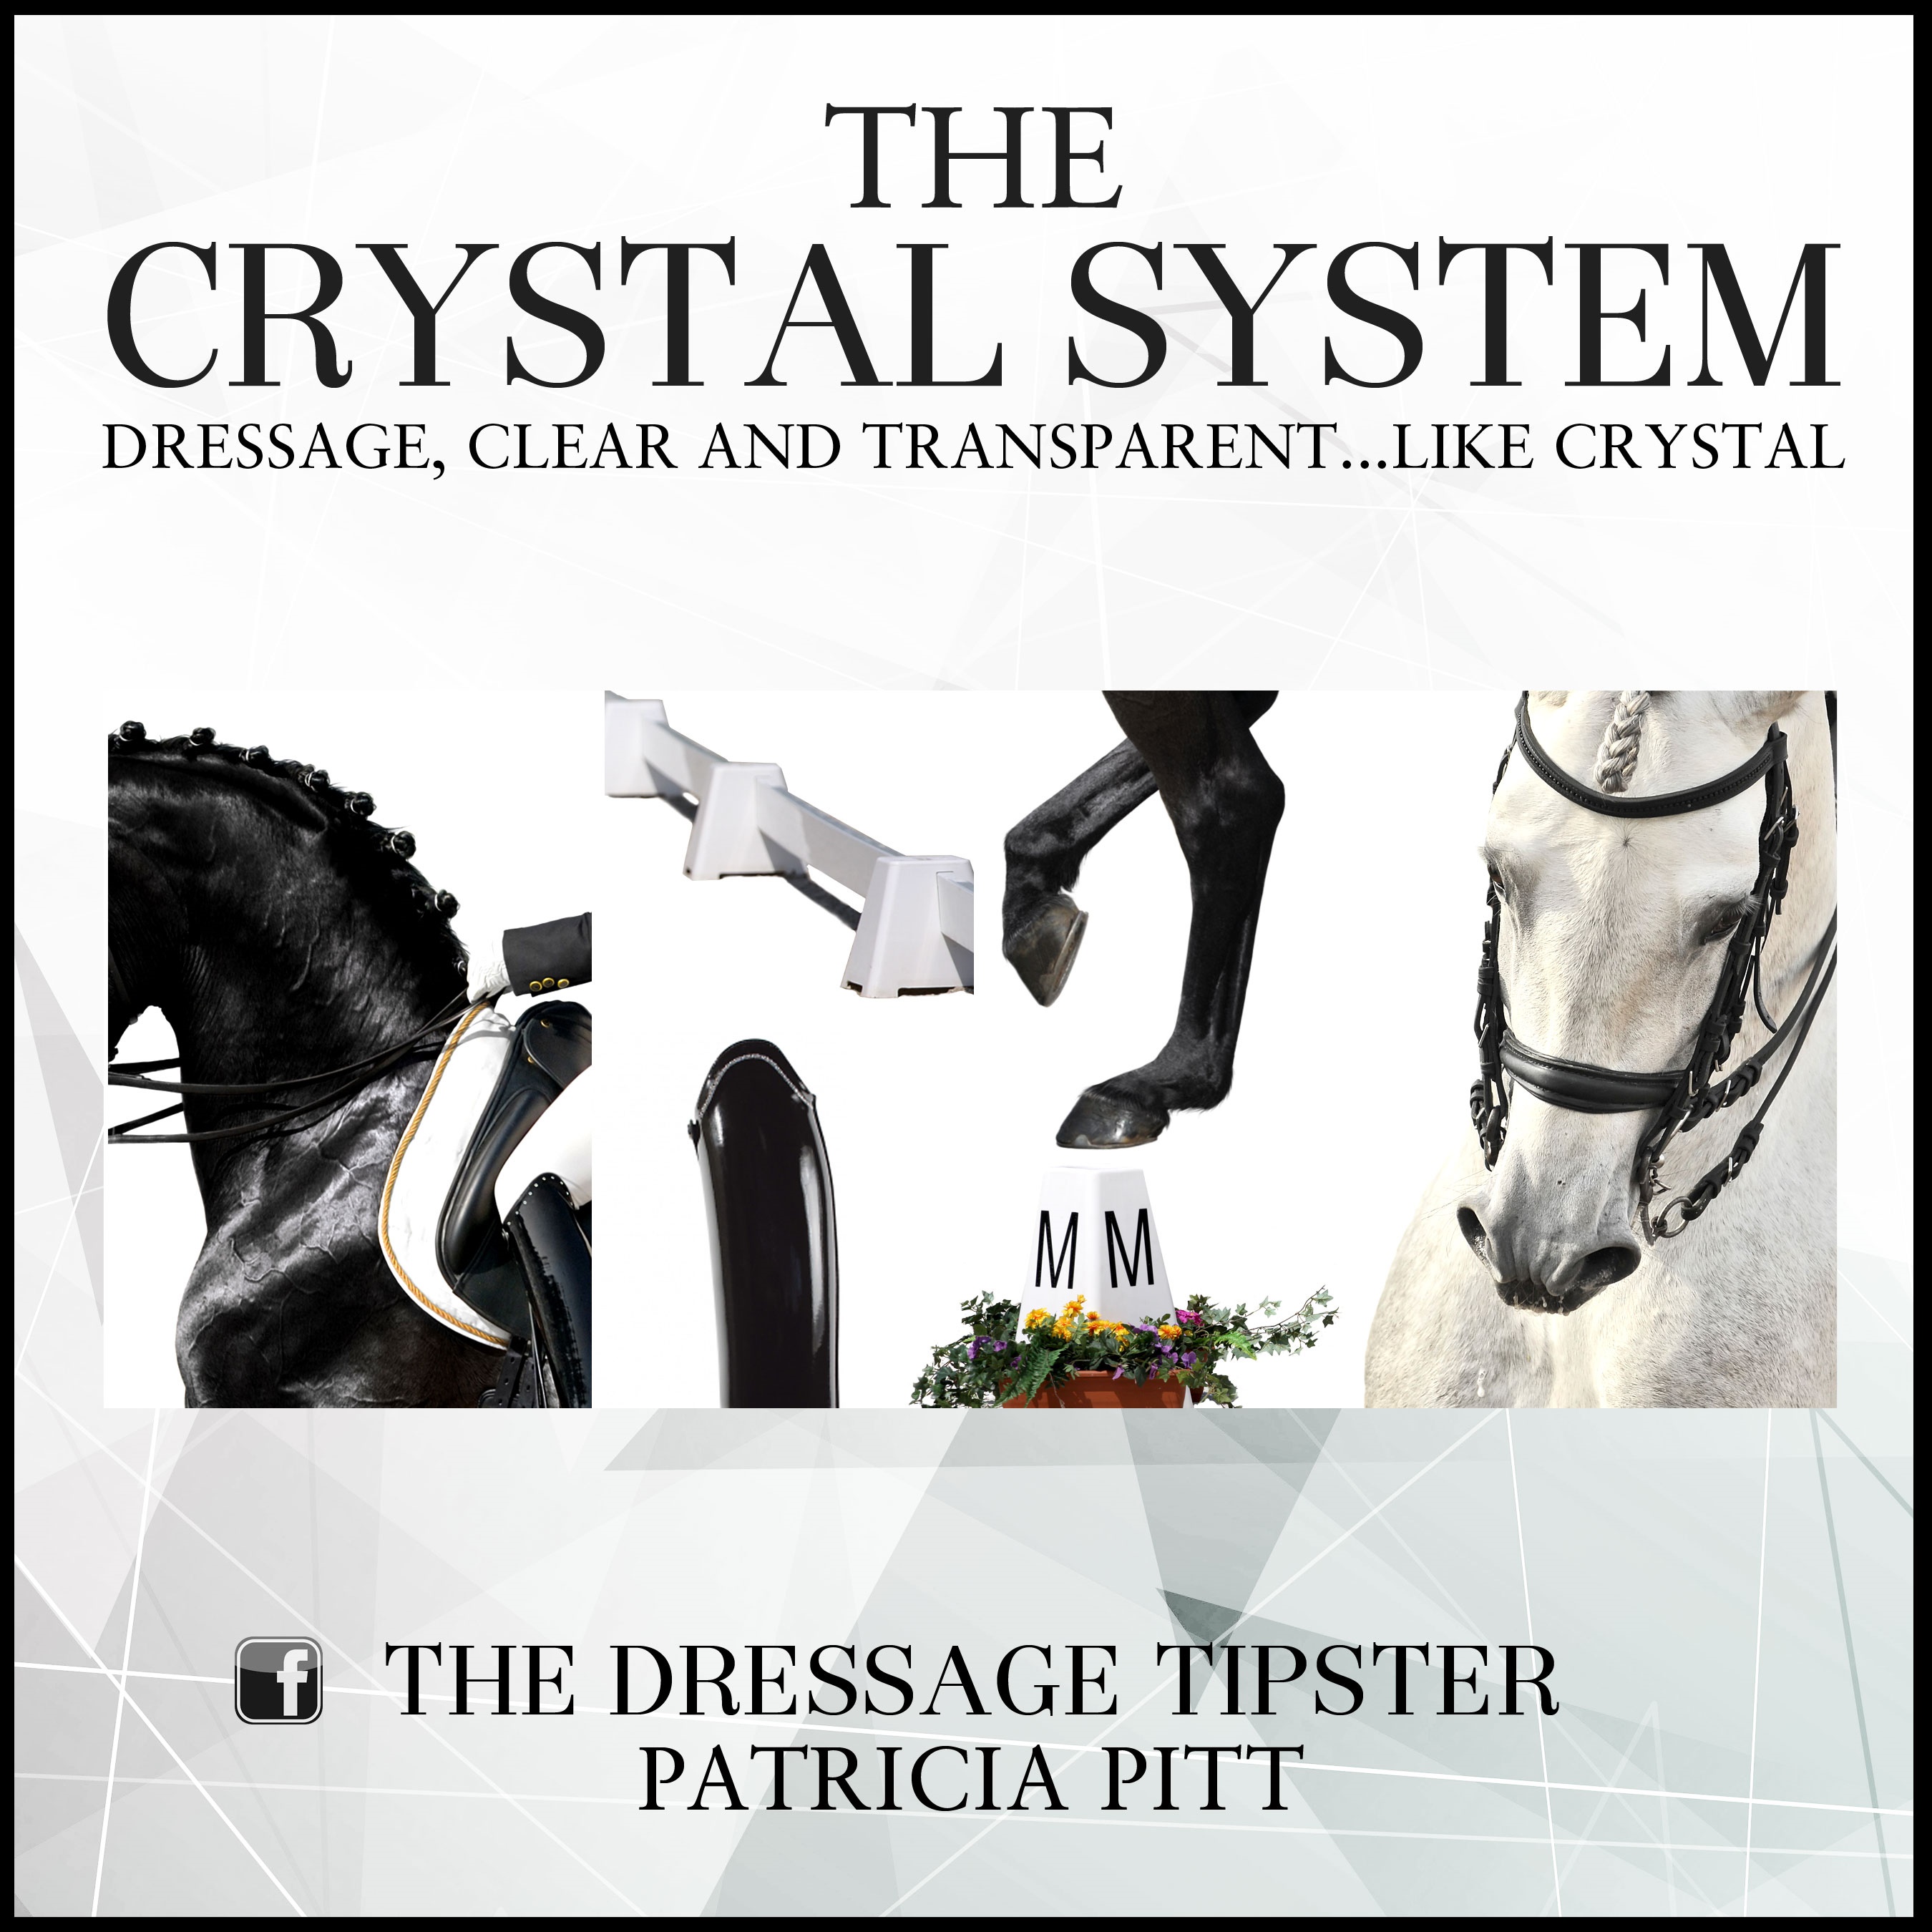 The Crystal System